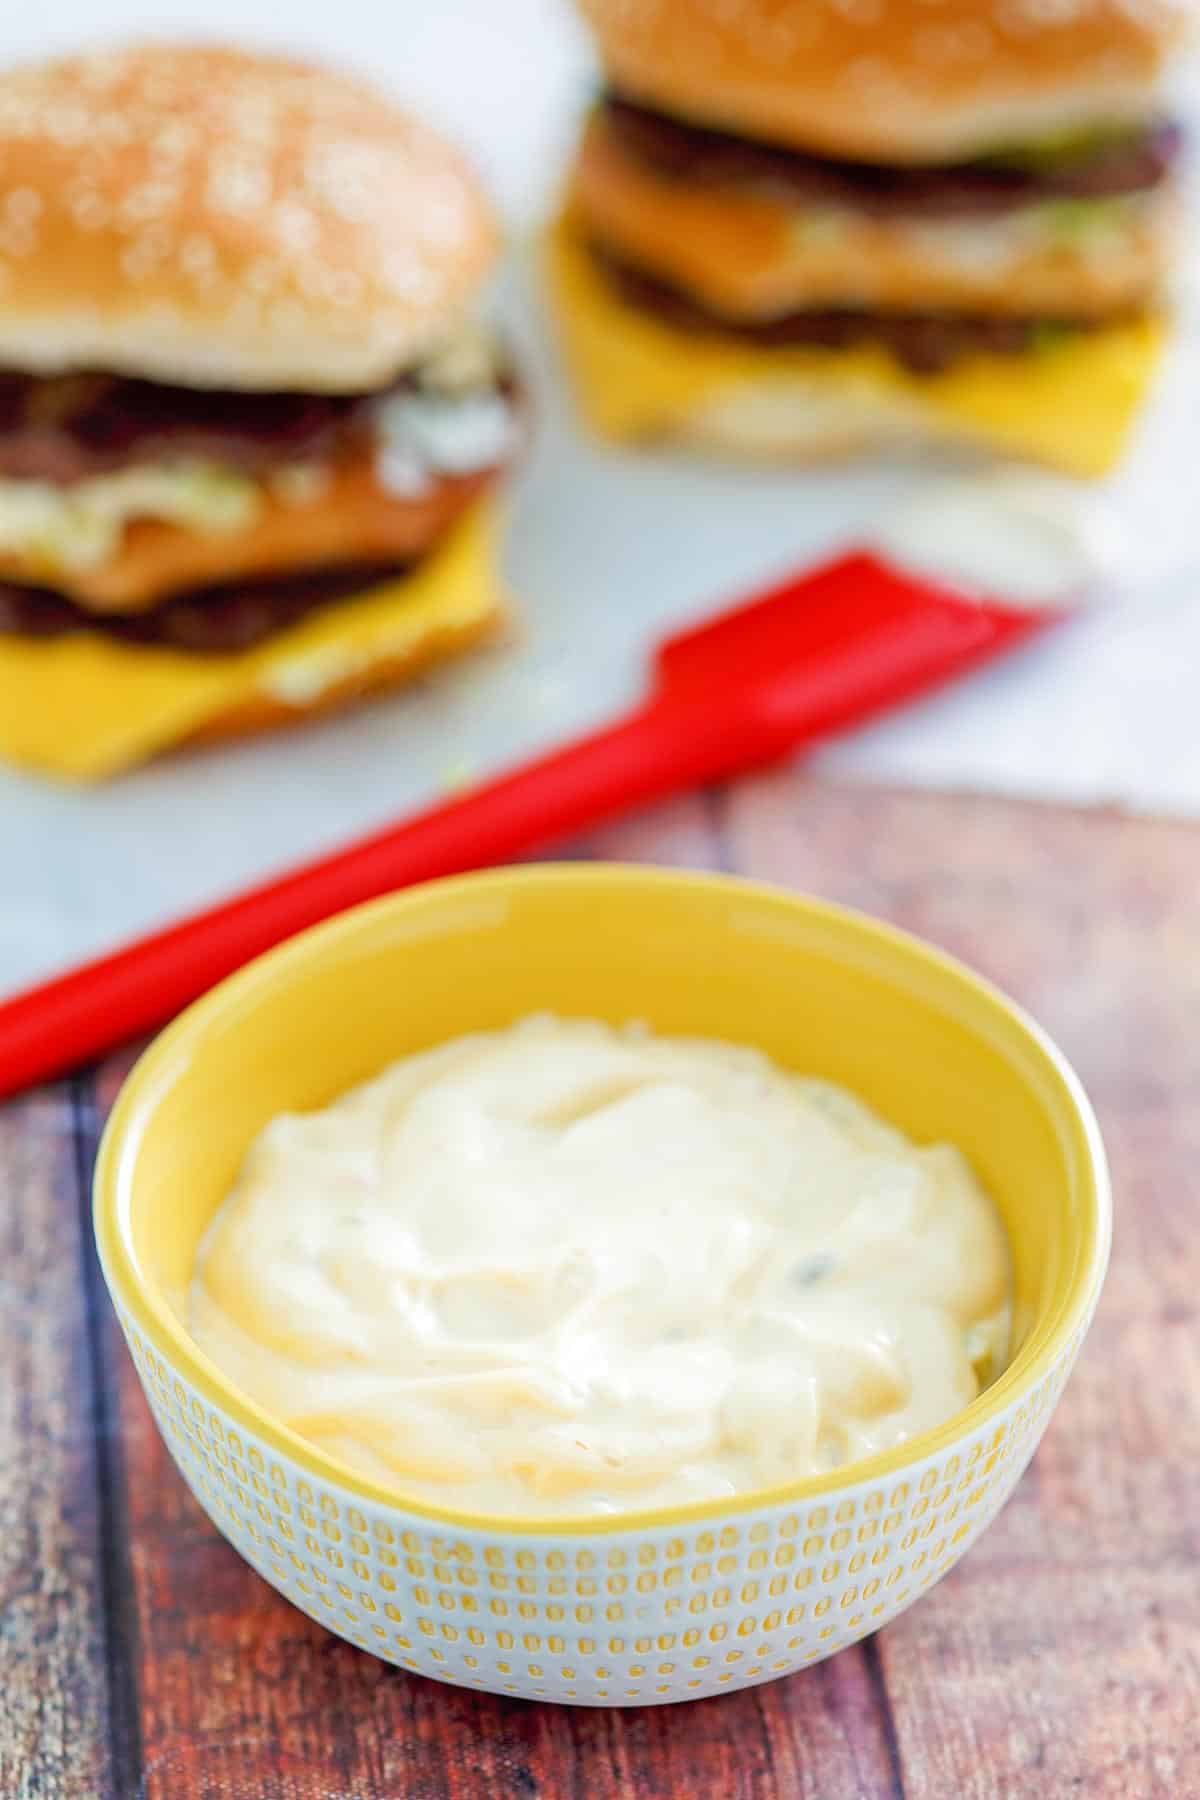 Burger sauce in a bowl and two burgers behind it.